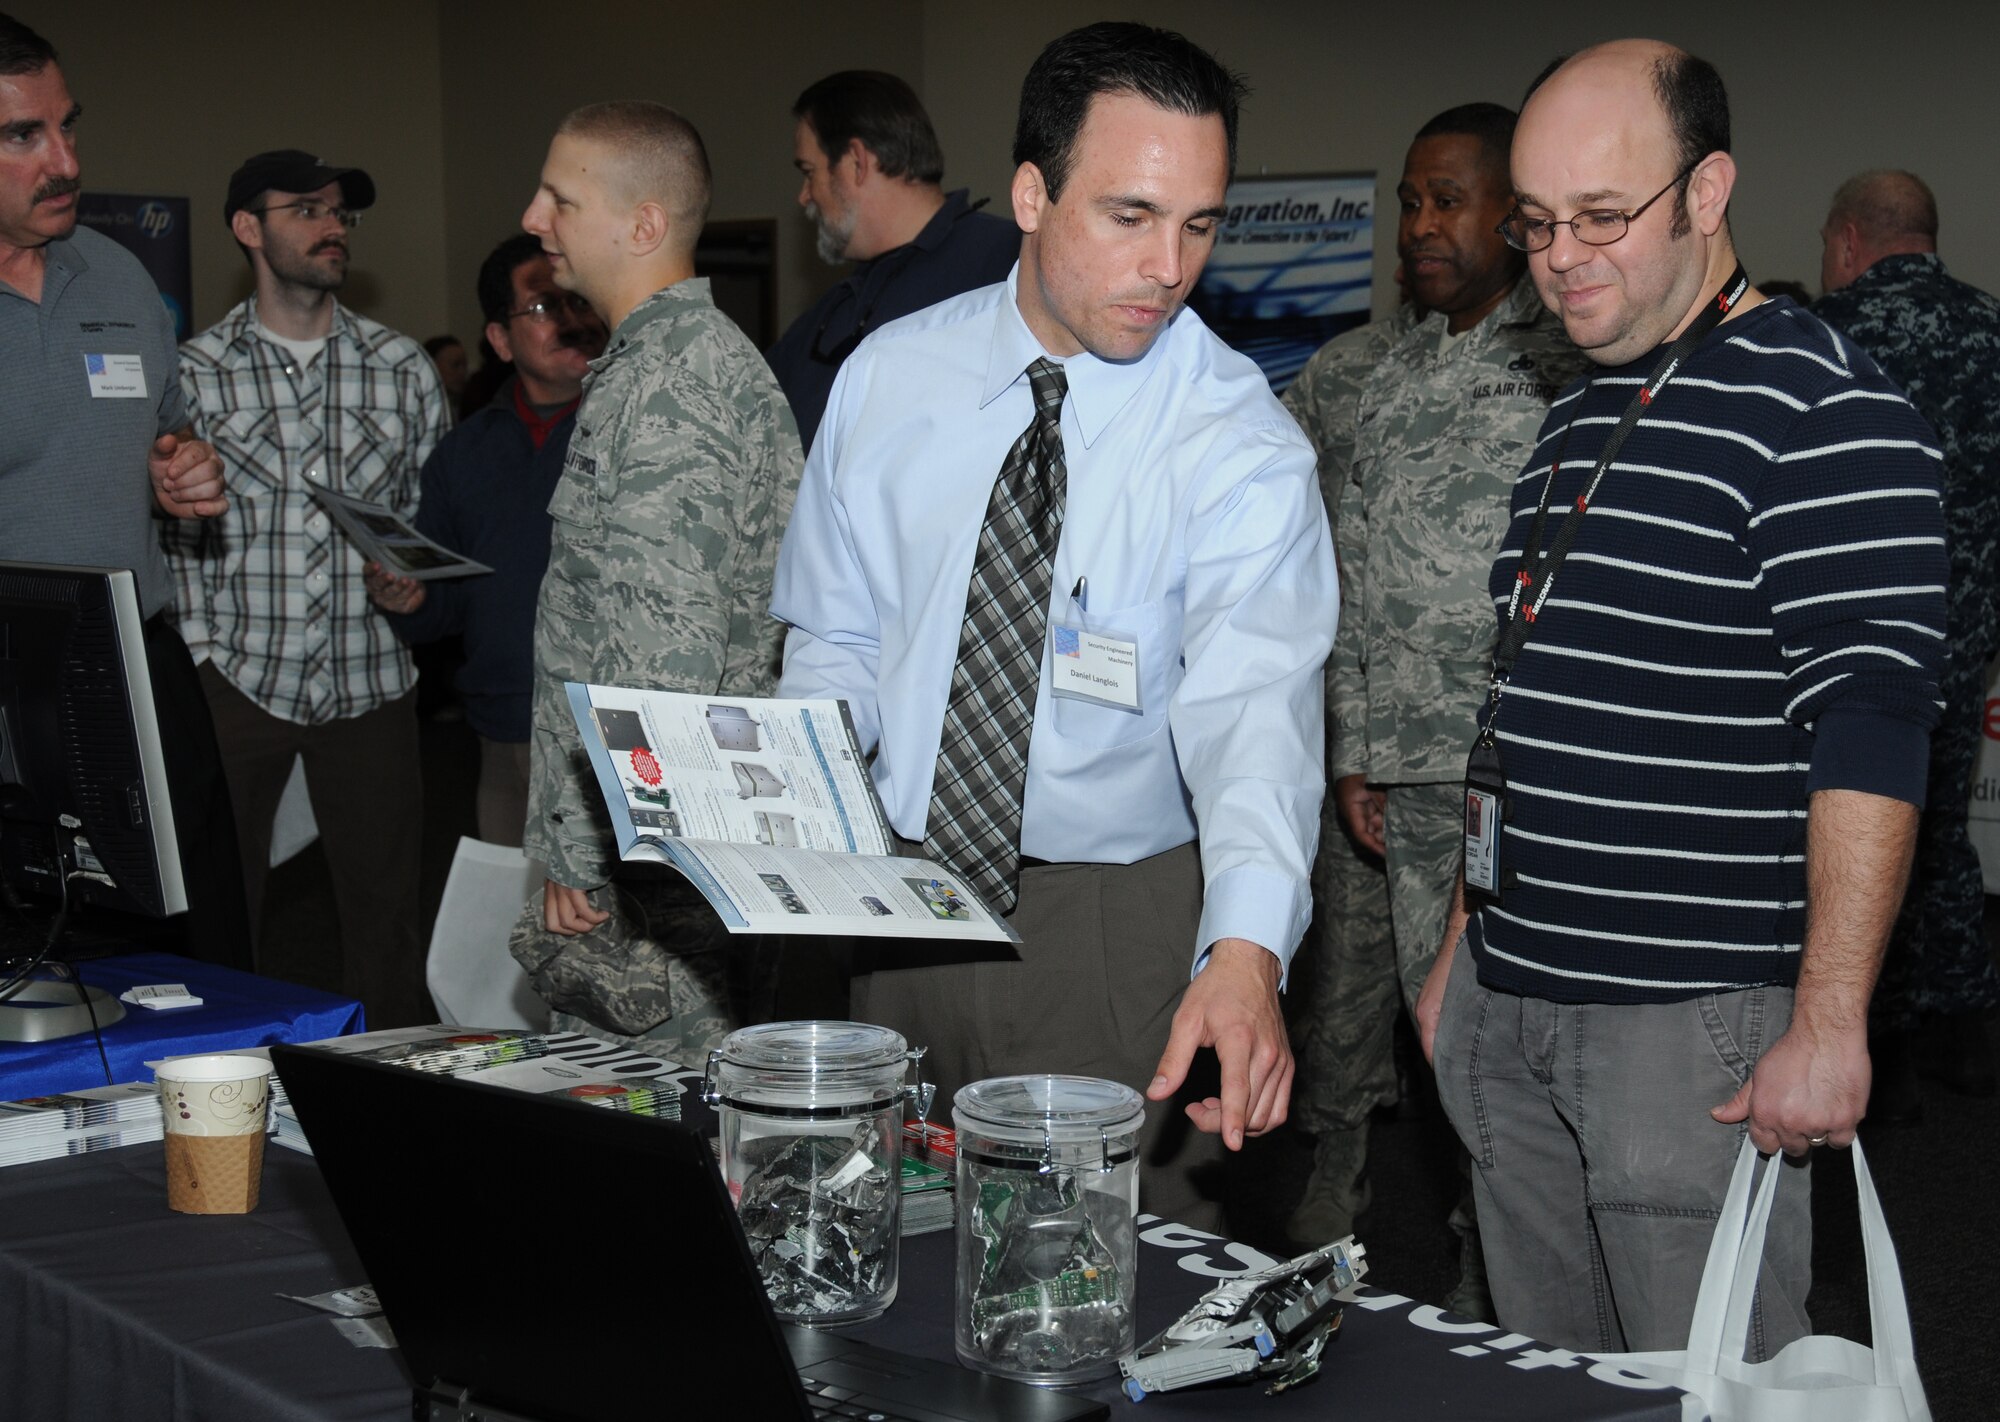 Daniel Langlois, Security Engineered Machinery territory sales representative, shows Charlie Kordahi, Stennis Space Center Naval Oceanographic Office, a variety of recycled items such as CDs during a technology expo Jan. 9, 2012, at the Roberts Consolidated Aircraft Maintenance Facility, Keesler Air Force Base, Miss.  The 17th annual free expo, hosted by the 81st Training Support Squadron, featured more than 40 exhibitors.  (U.S. Air Force photo by Kemberly Groue)